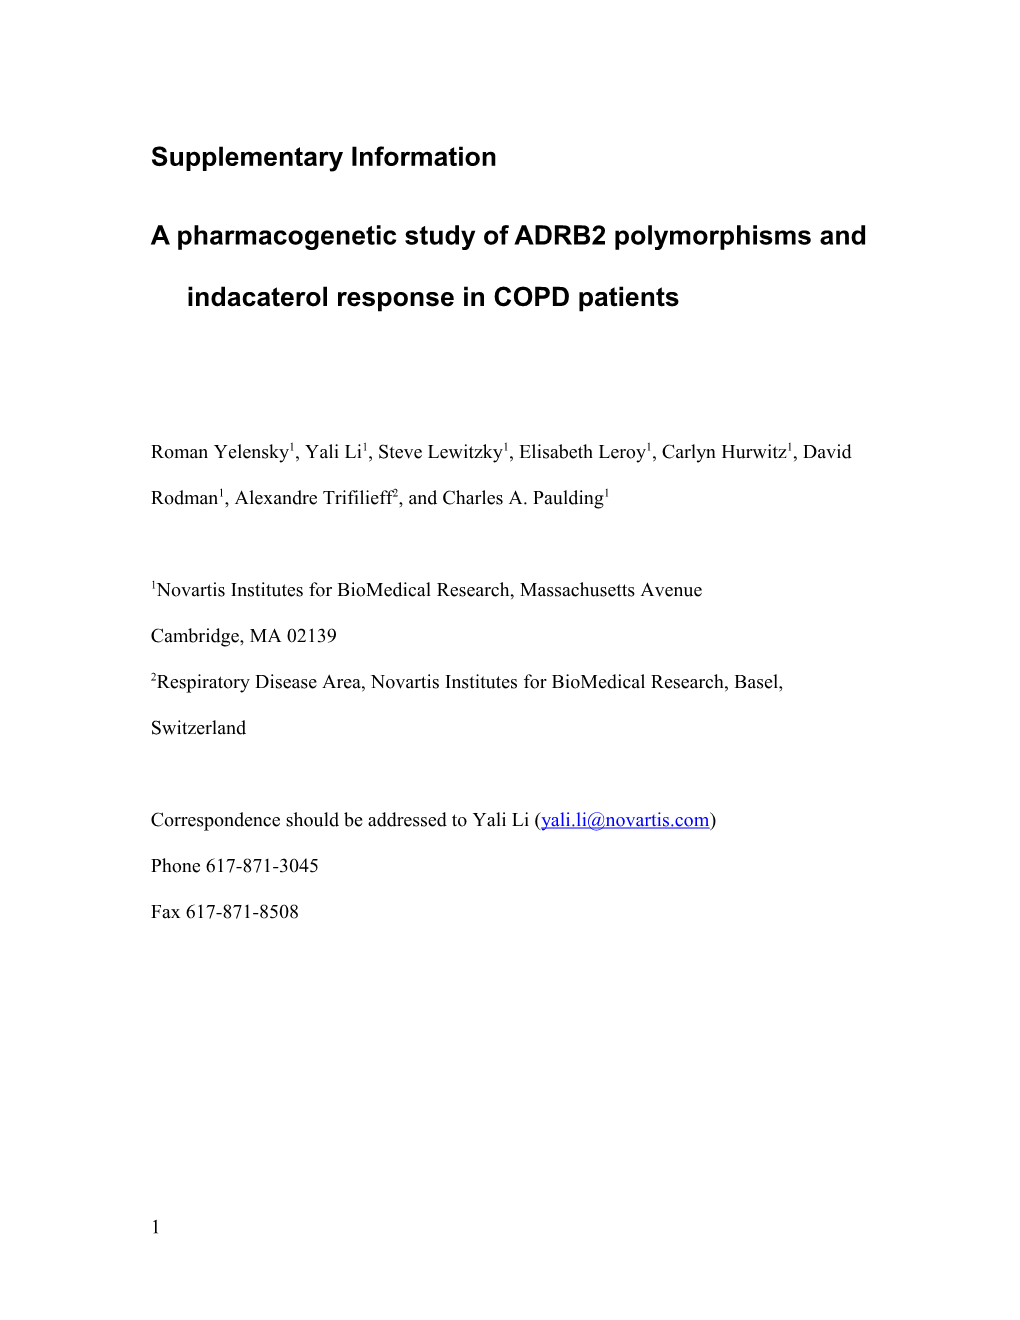 A Pharmacogenetic Study of ADRB2 Polymorphisms and Indacaterol Response in COPD Patients